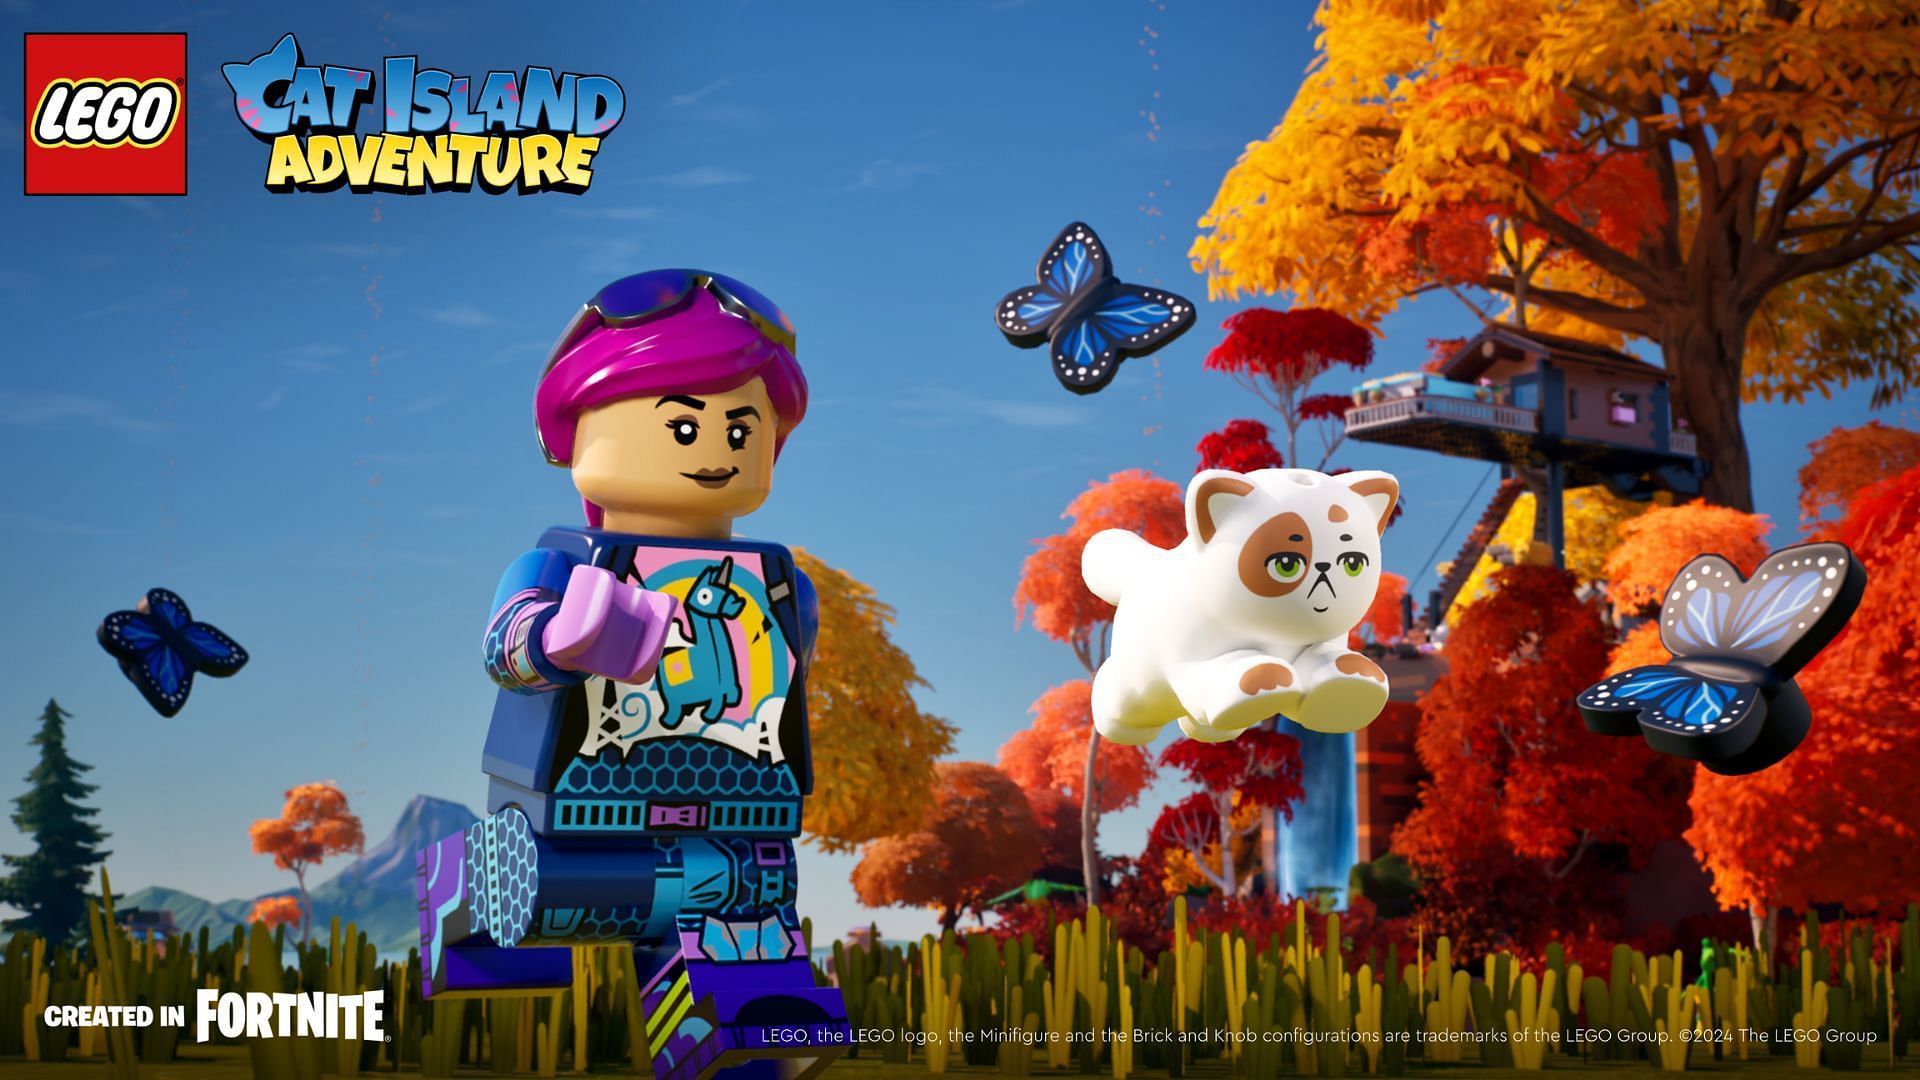 LEGO Fortnite Cat Island Adventure: UEFN map code, how to play, and more